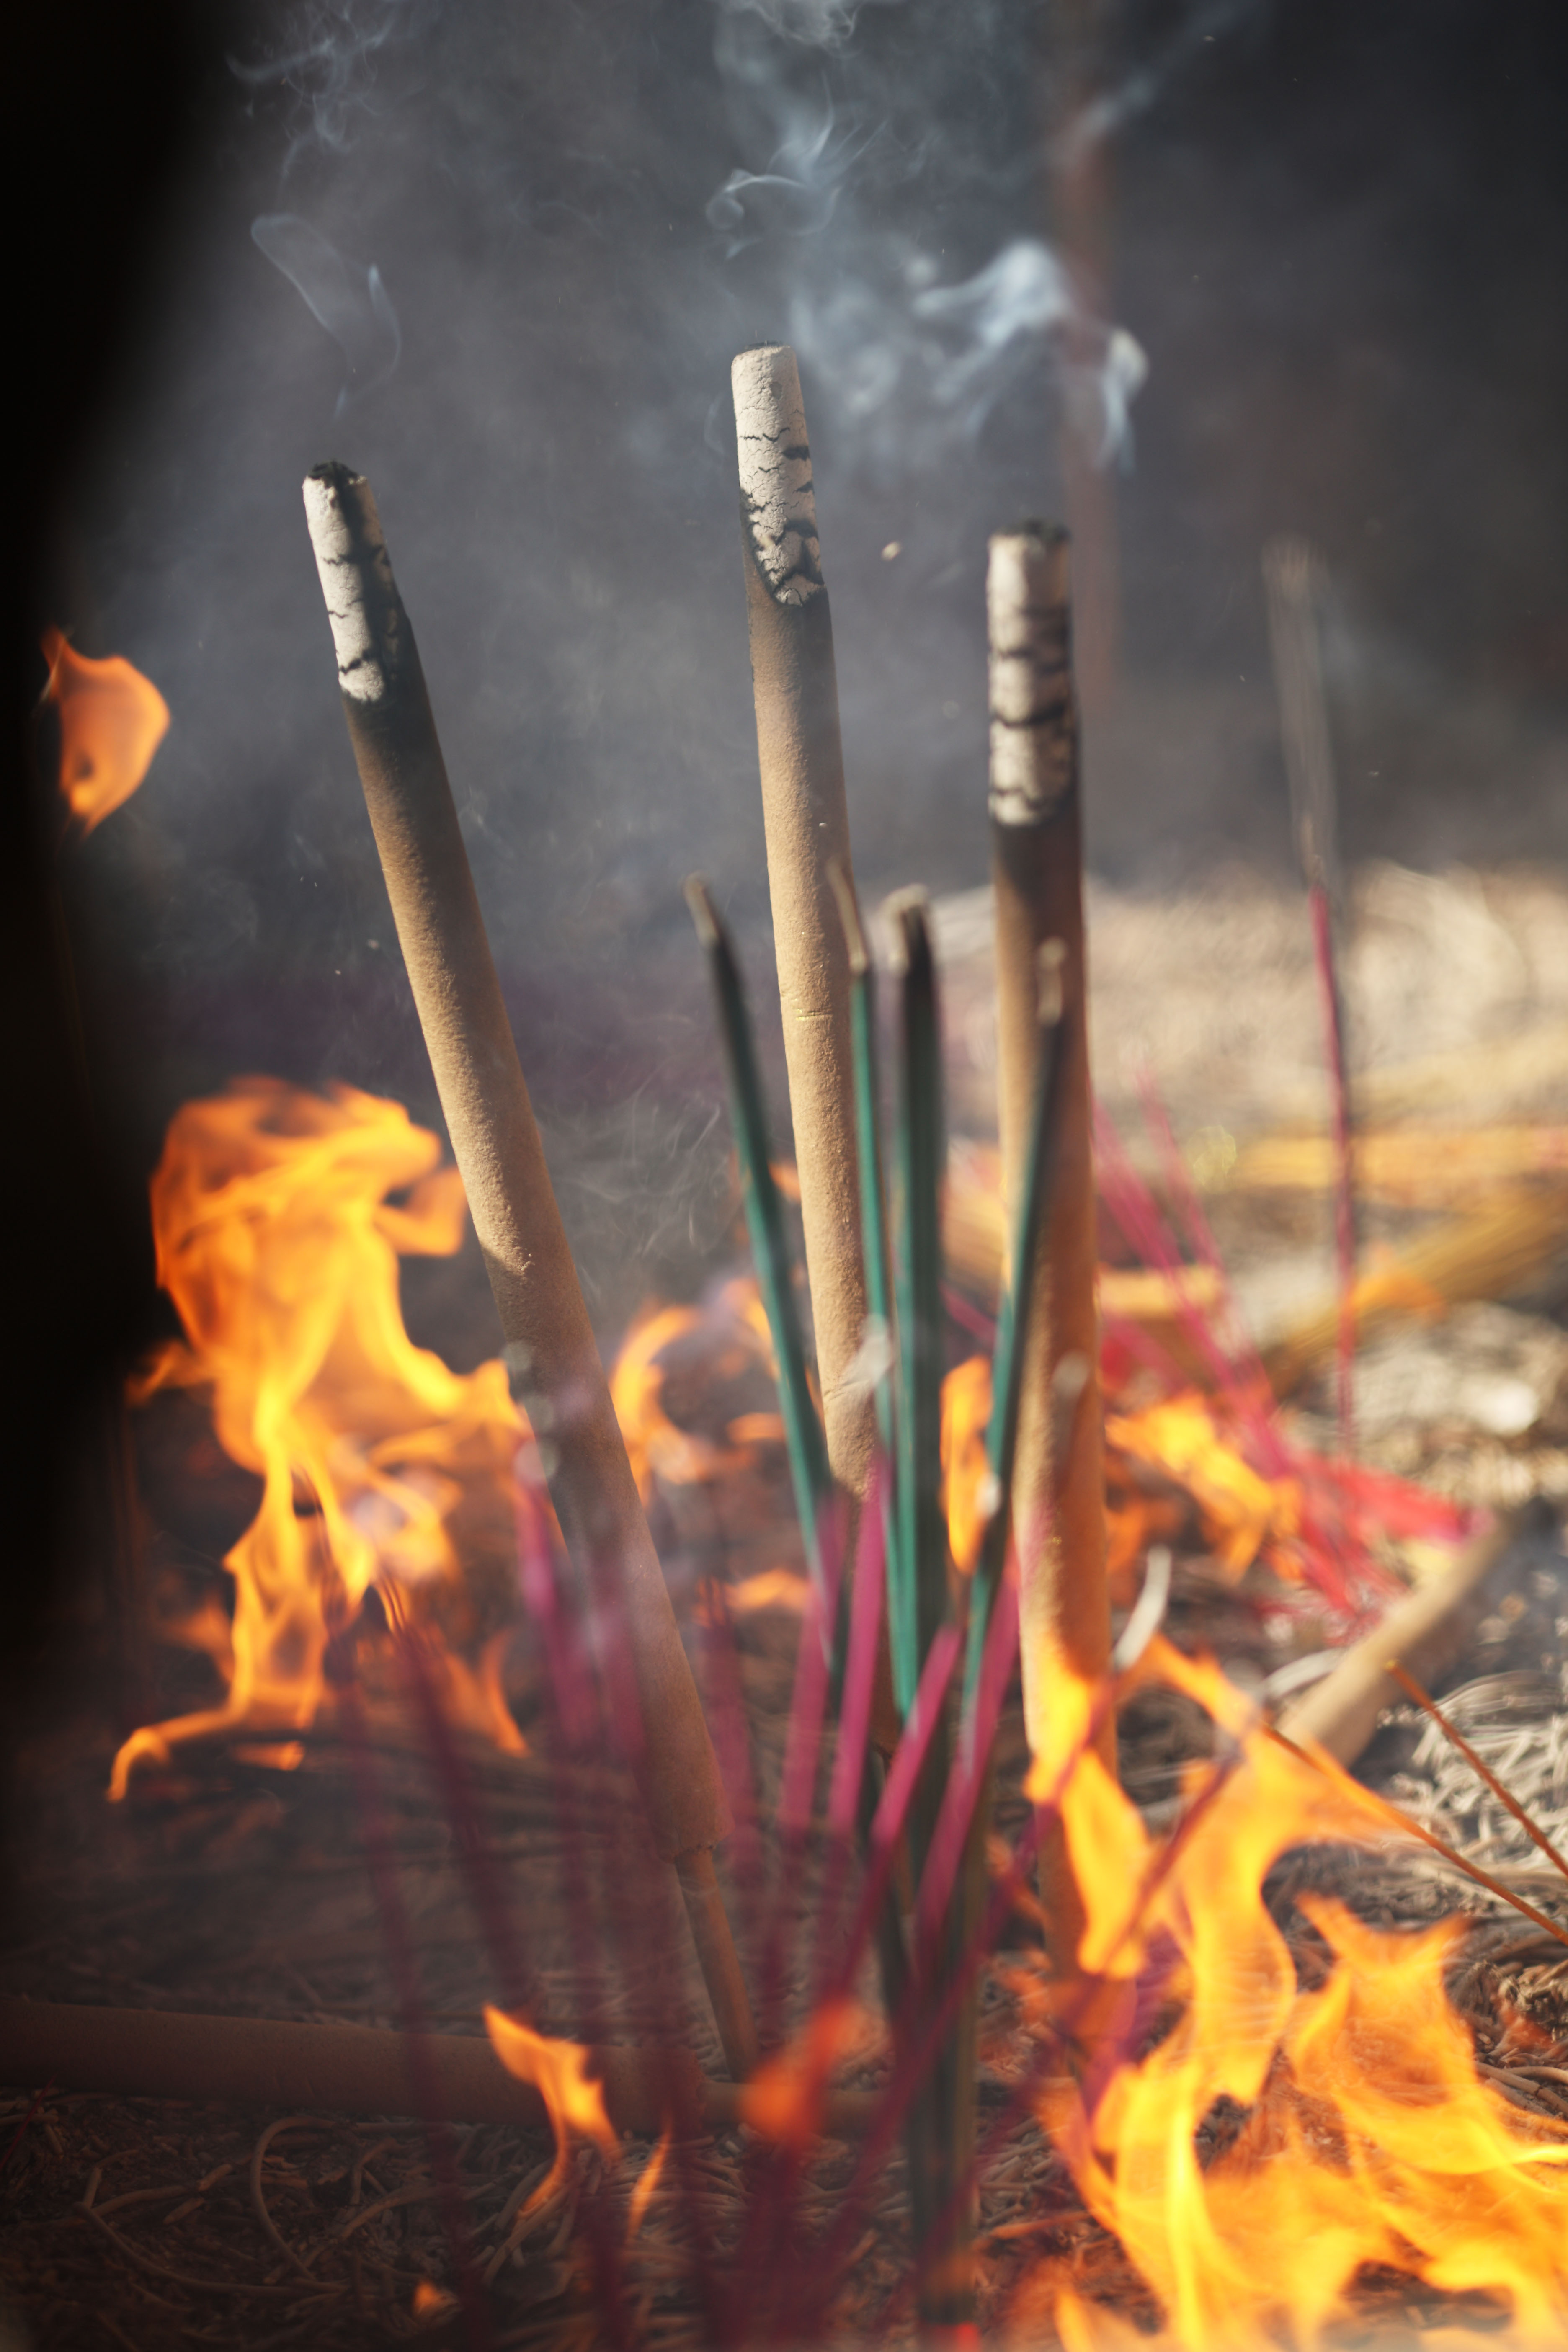 photo,material,free,landscape,picture,stock photo,Creative Commons,A HangzhouLingyingTemple incense stick, Buddhism, An incense holder, An incense stick, Smoke